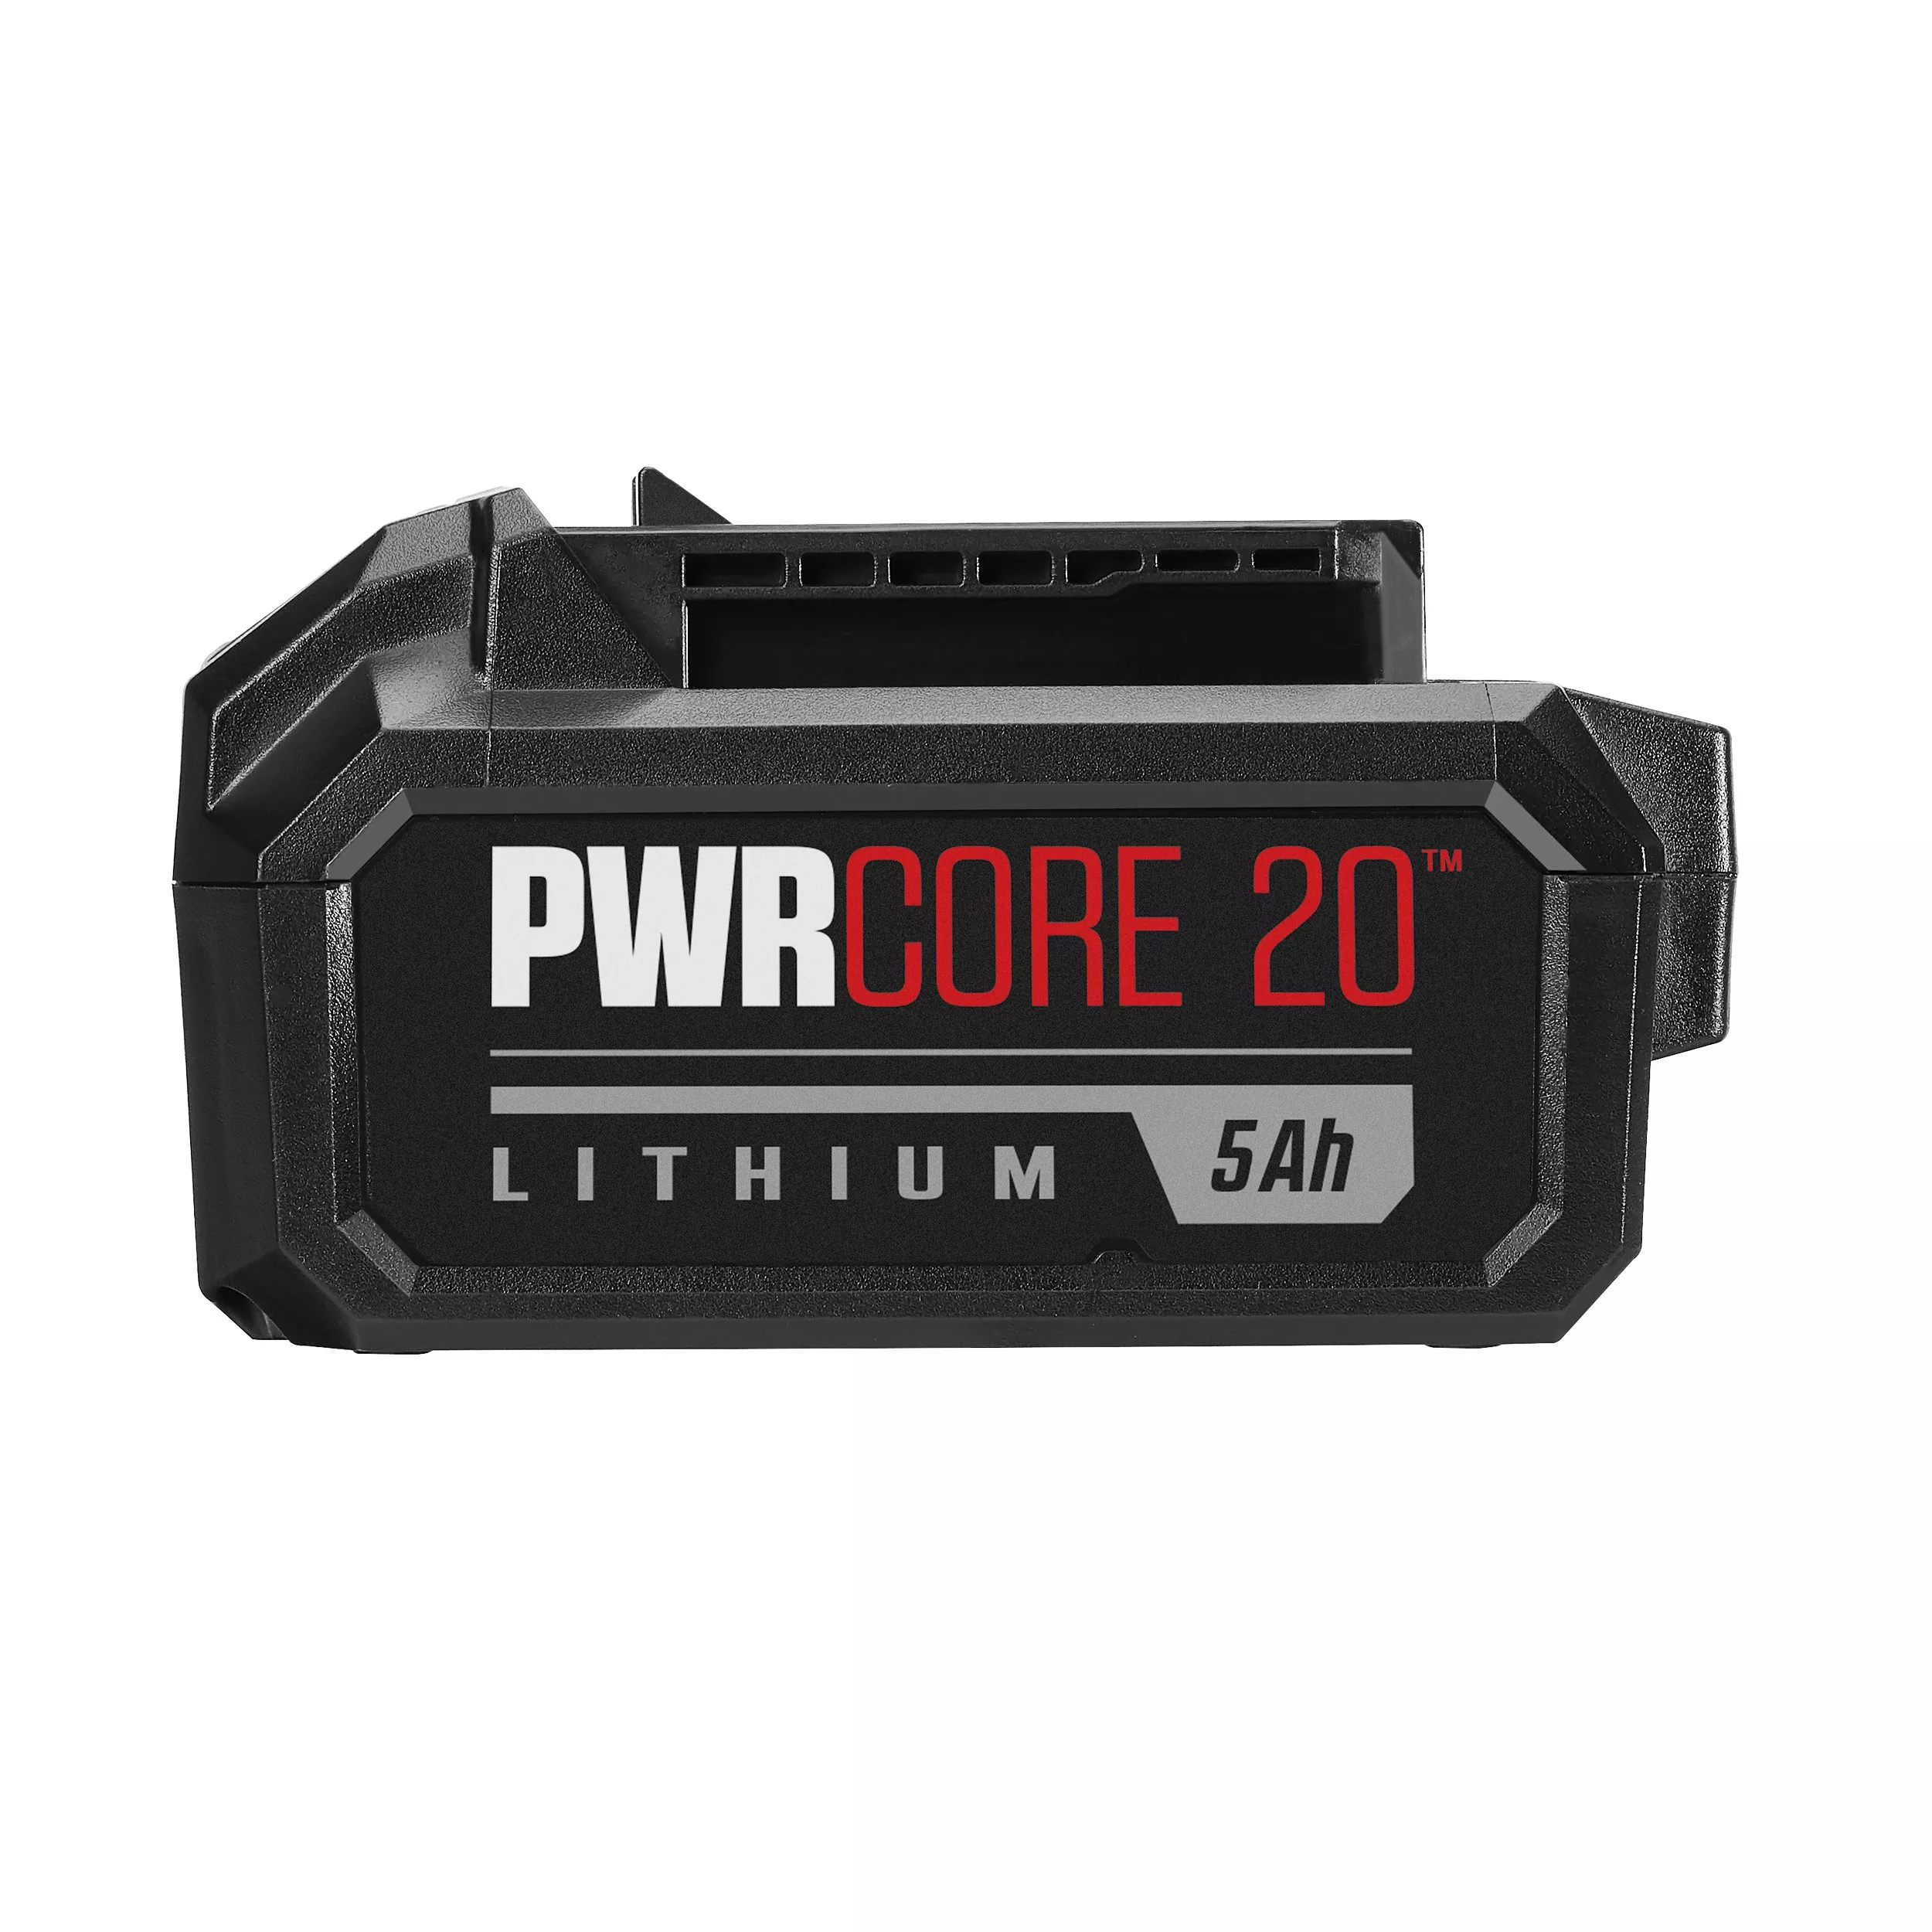 Skil PWR CORE 20 20V 5.0Ah Lithium Battery